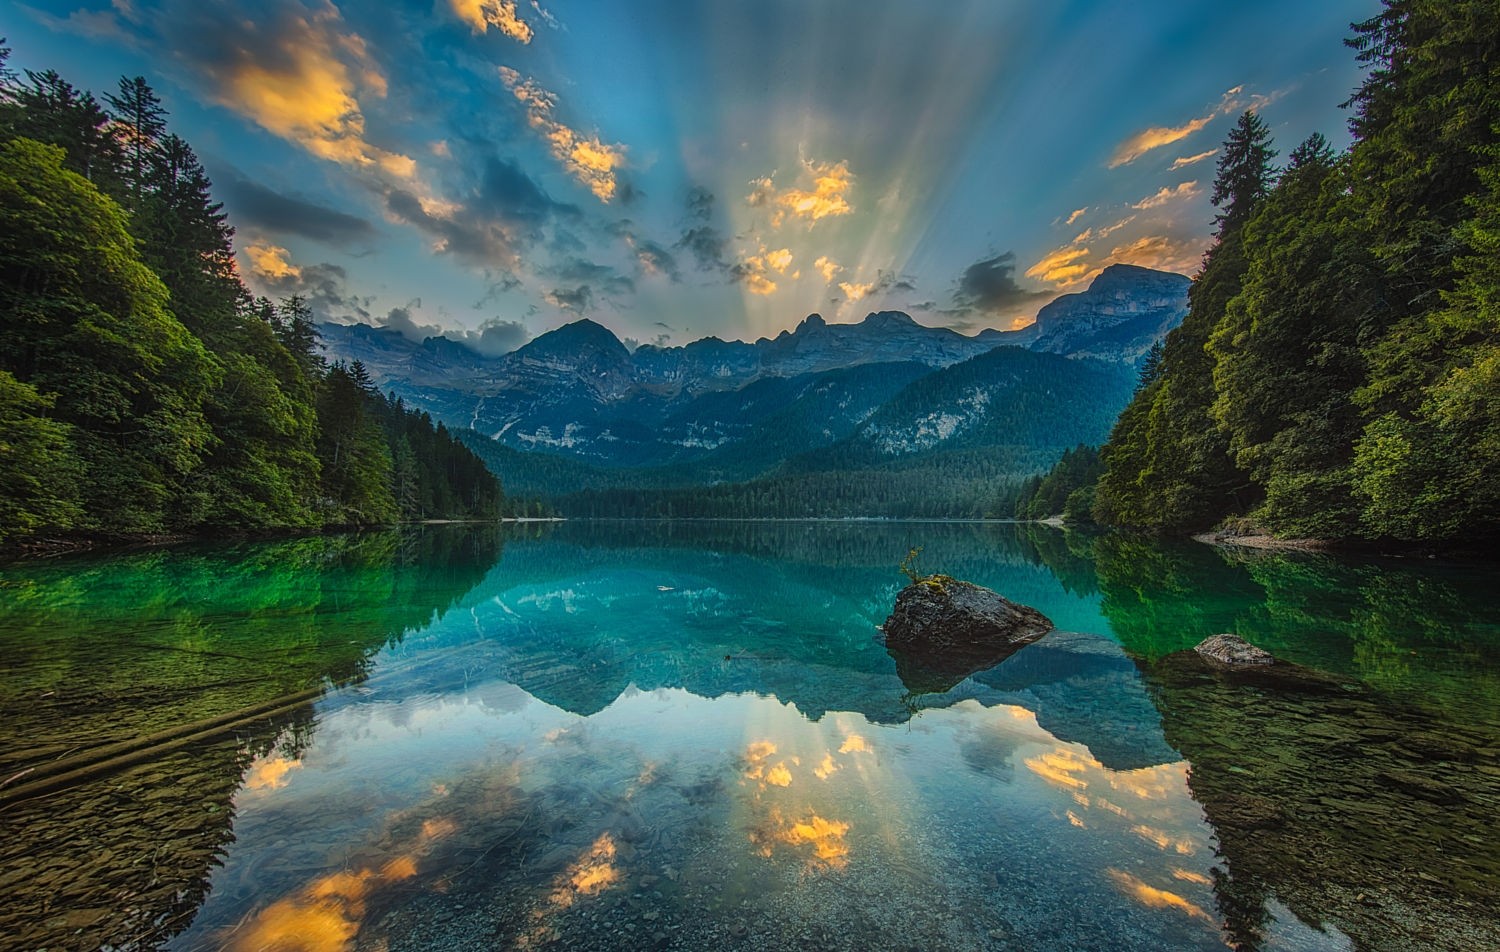 photography, Nature, Landscape, Lake, Calm waters, Sunset, Reflection, Sun rays, Forest, Mountains, Dolomites (mountains), Italy Wallpaper